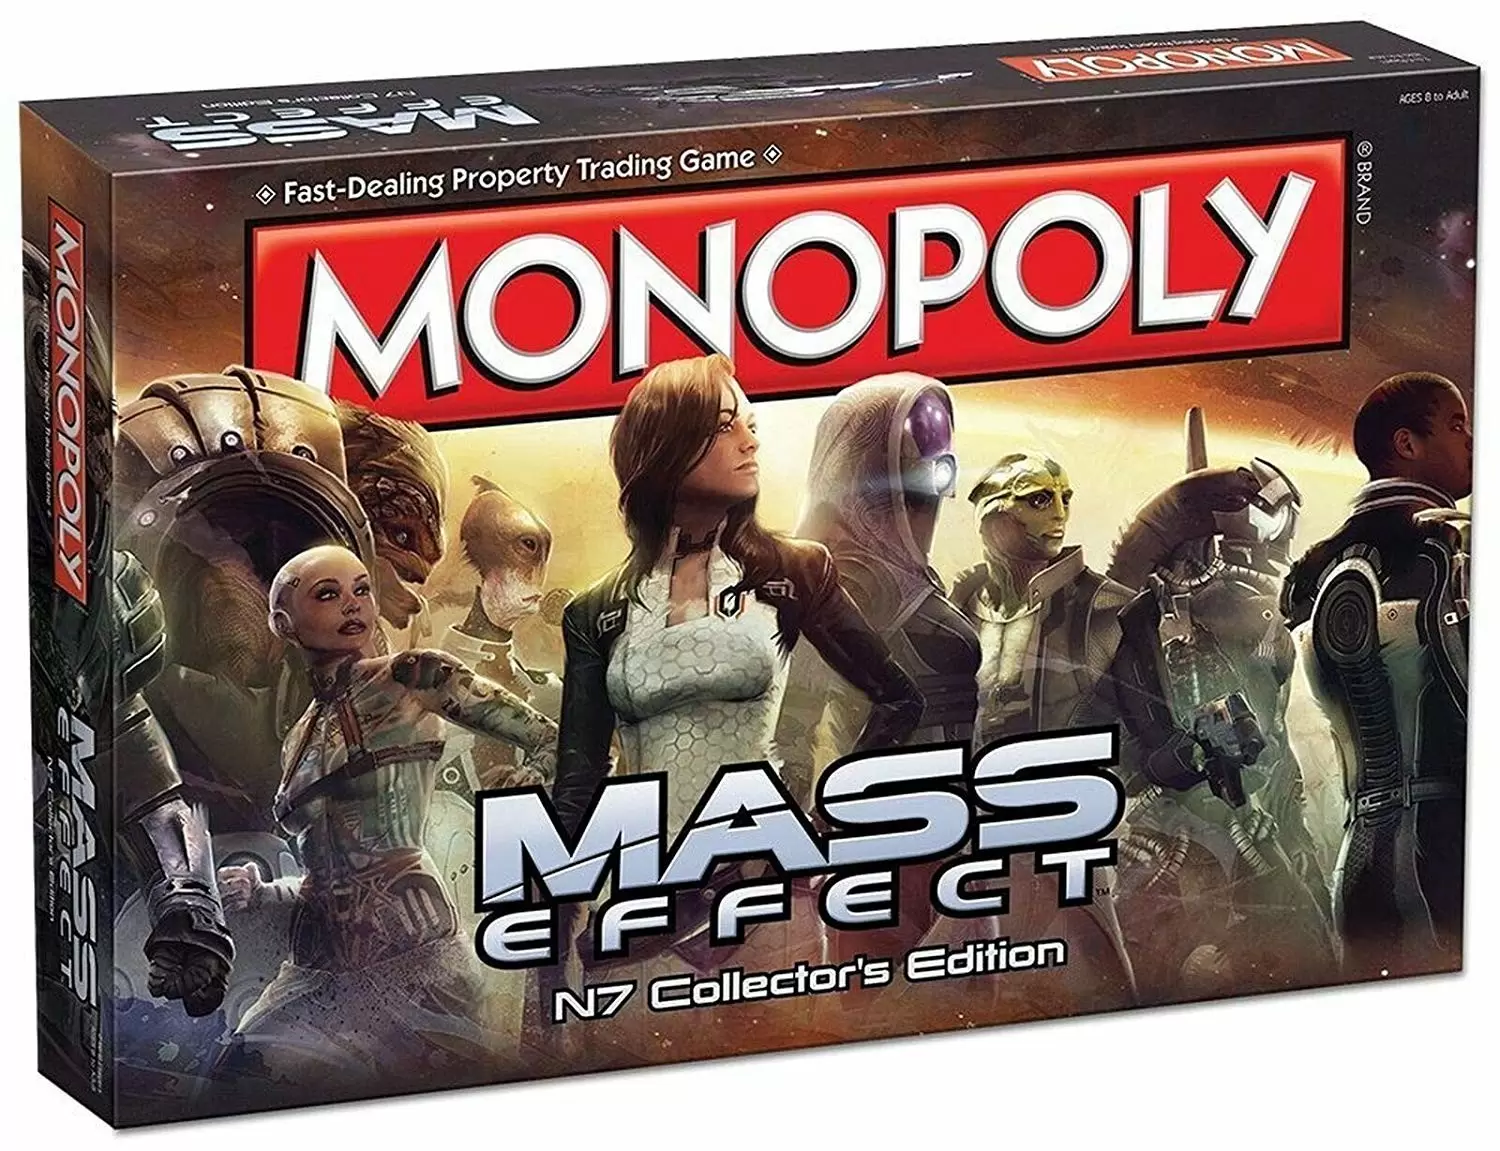 Monopoly Video Games - Monopoly - Mass Effect Edition